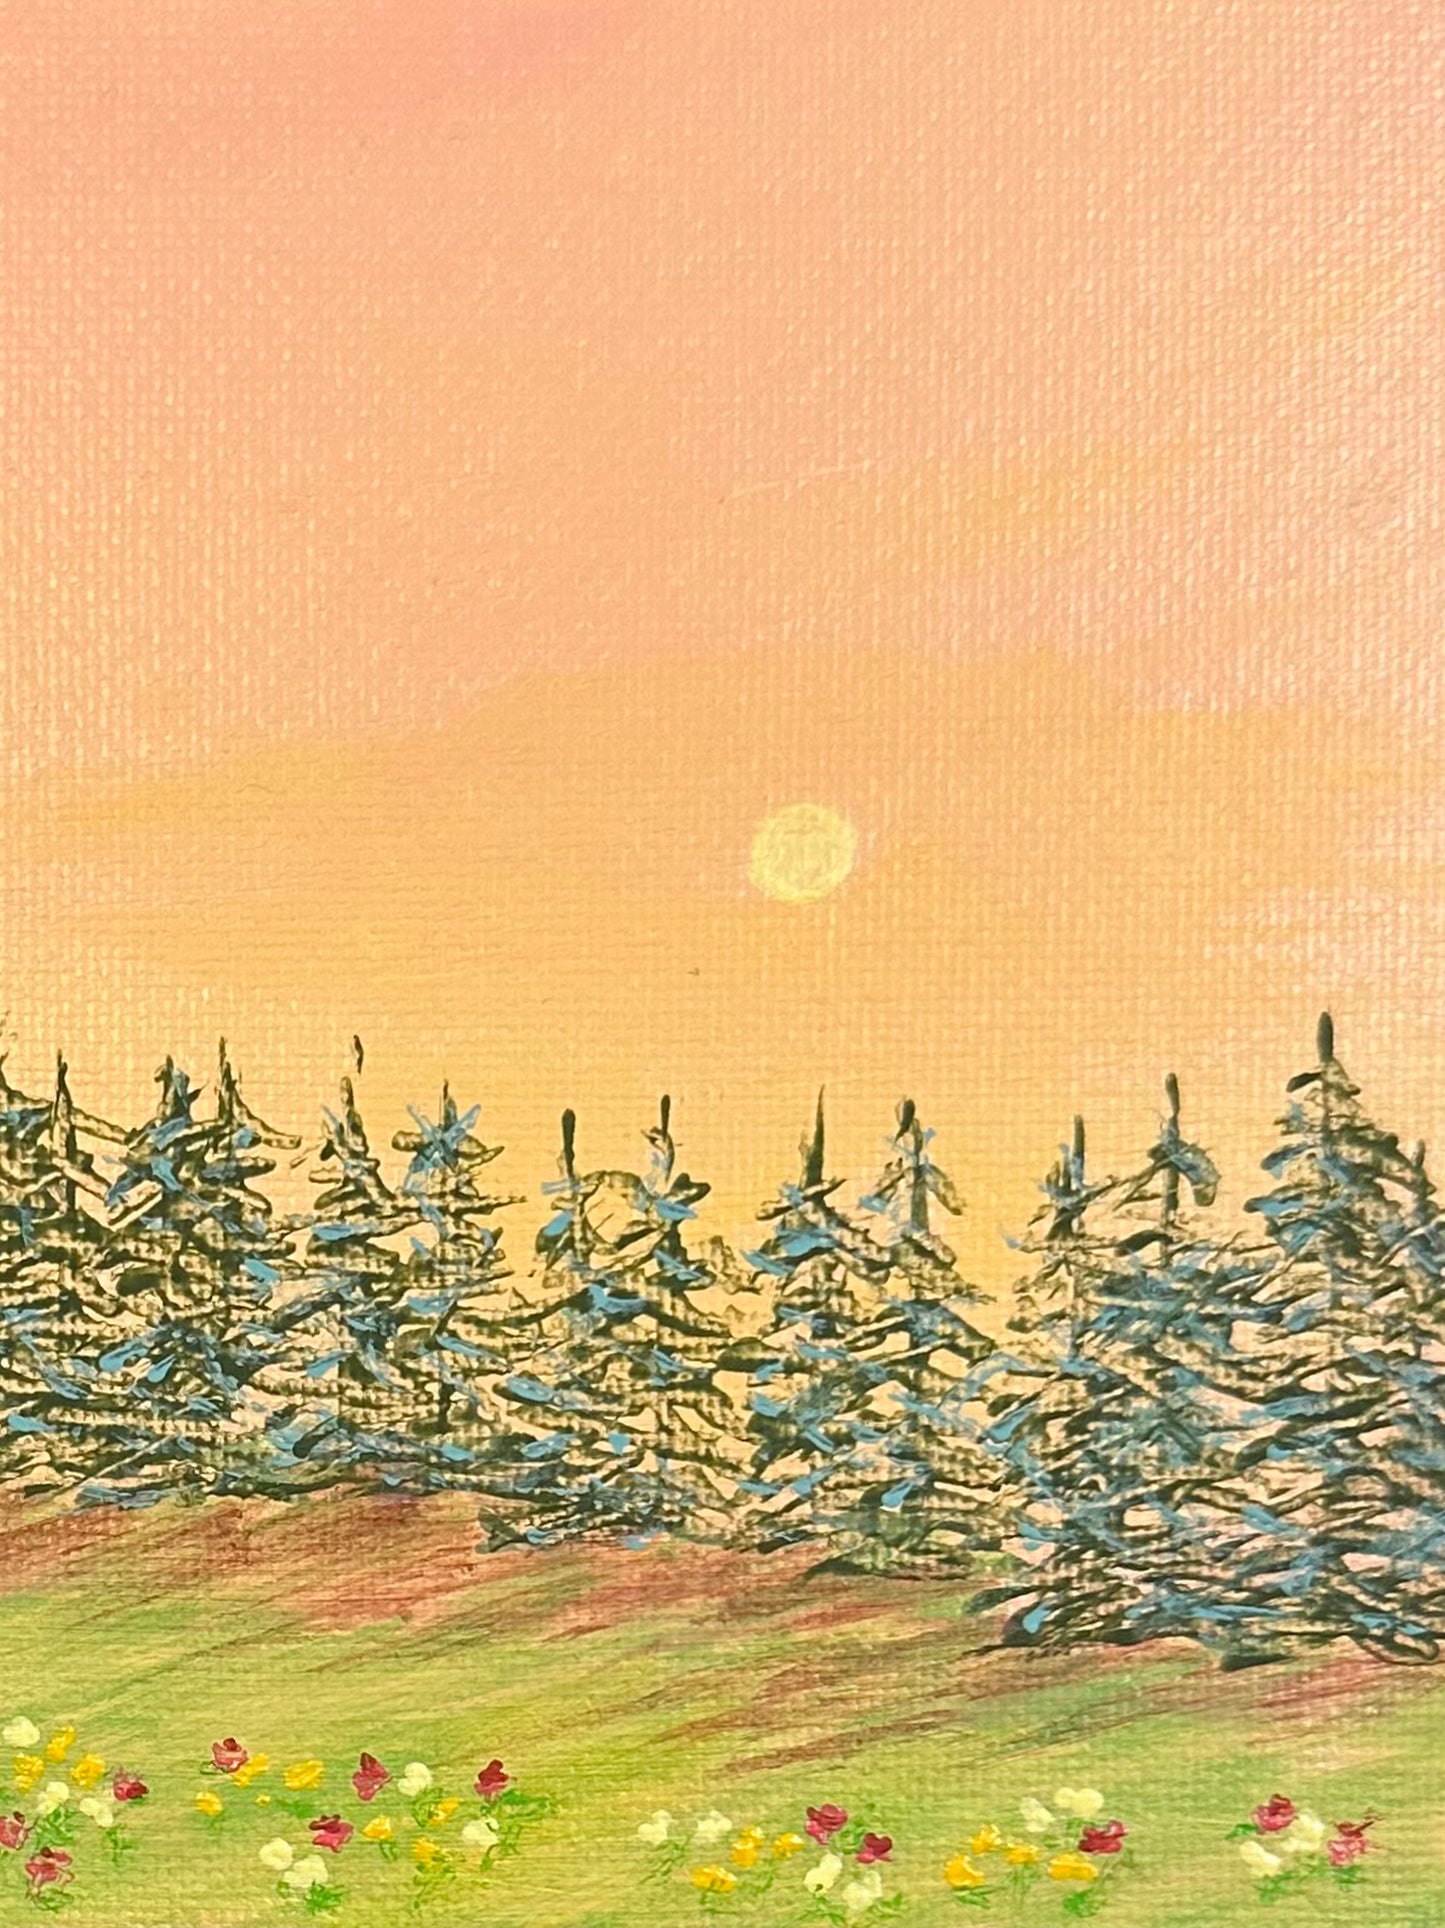 A Day Ends - Acrylic Forest Sunset Landscape Painting by Deb Bossert Artworks